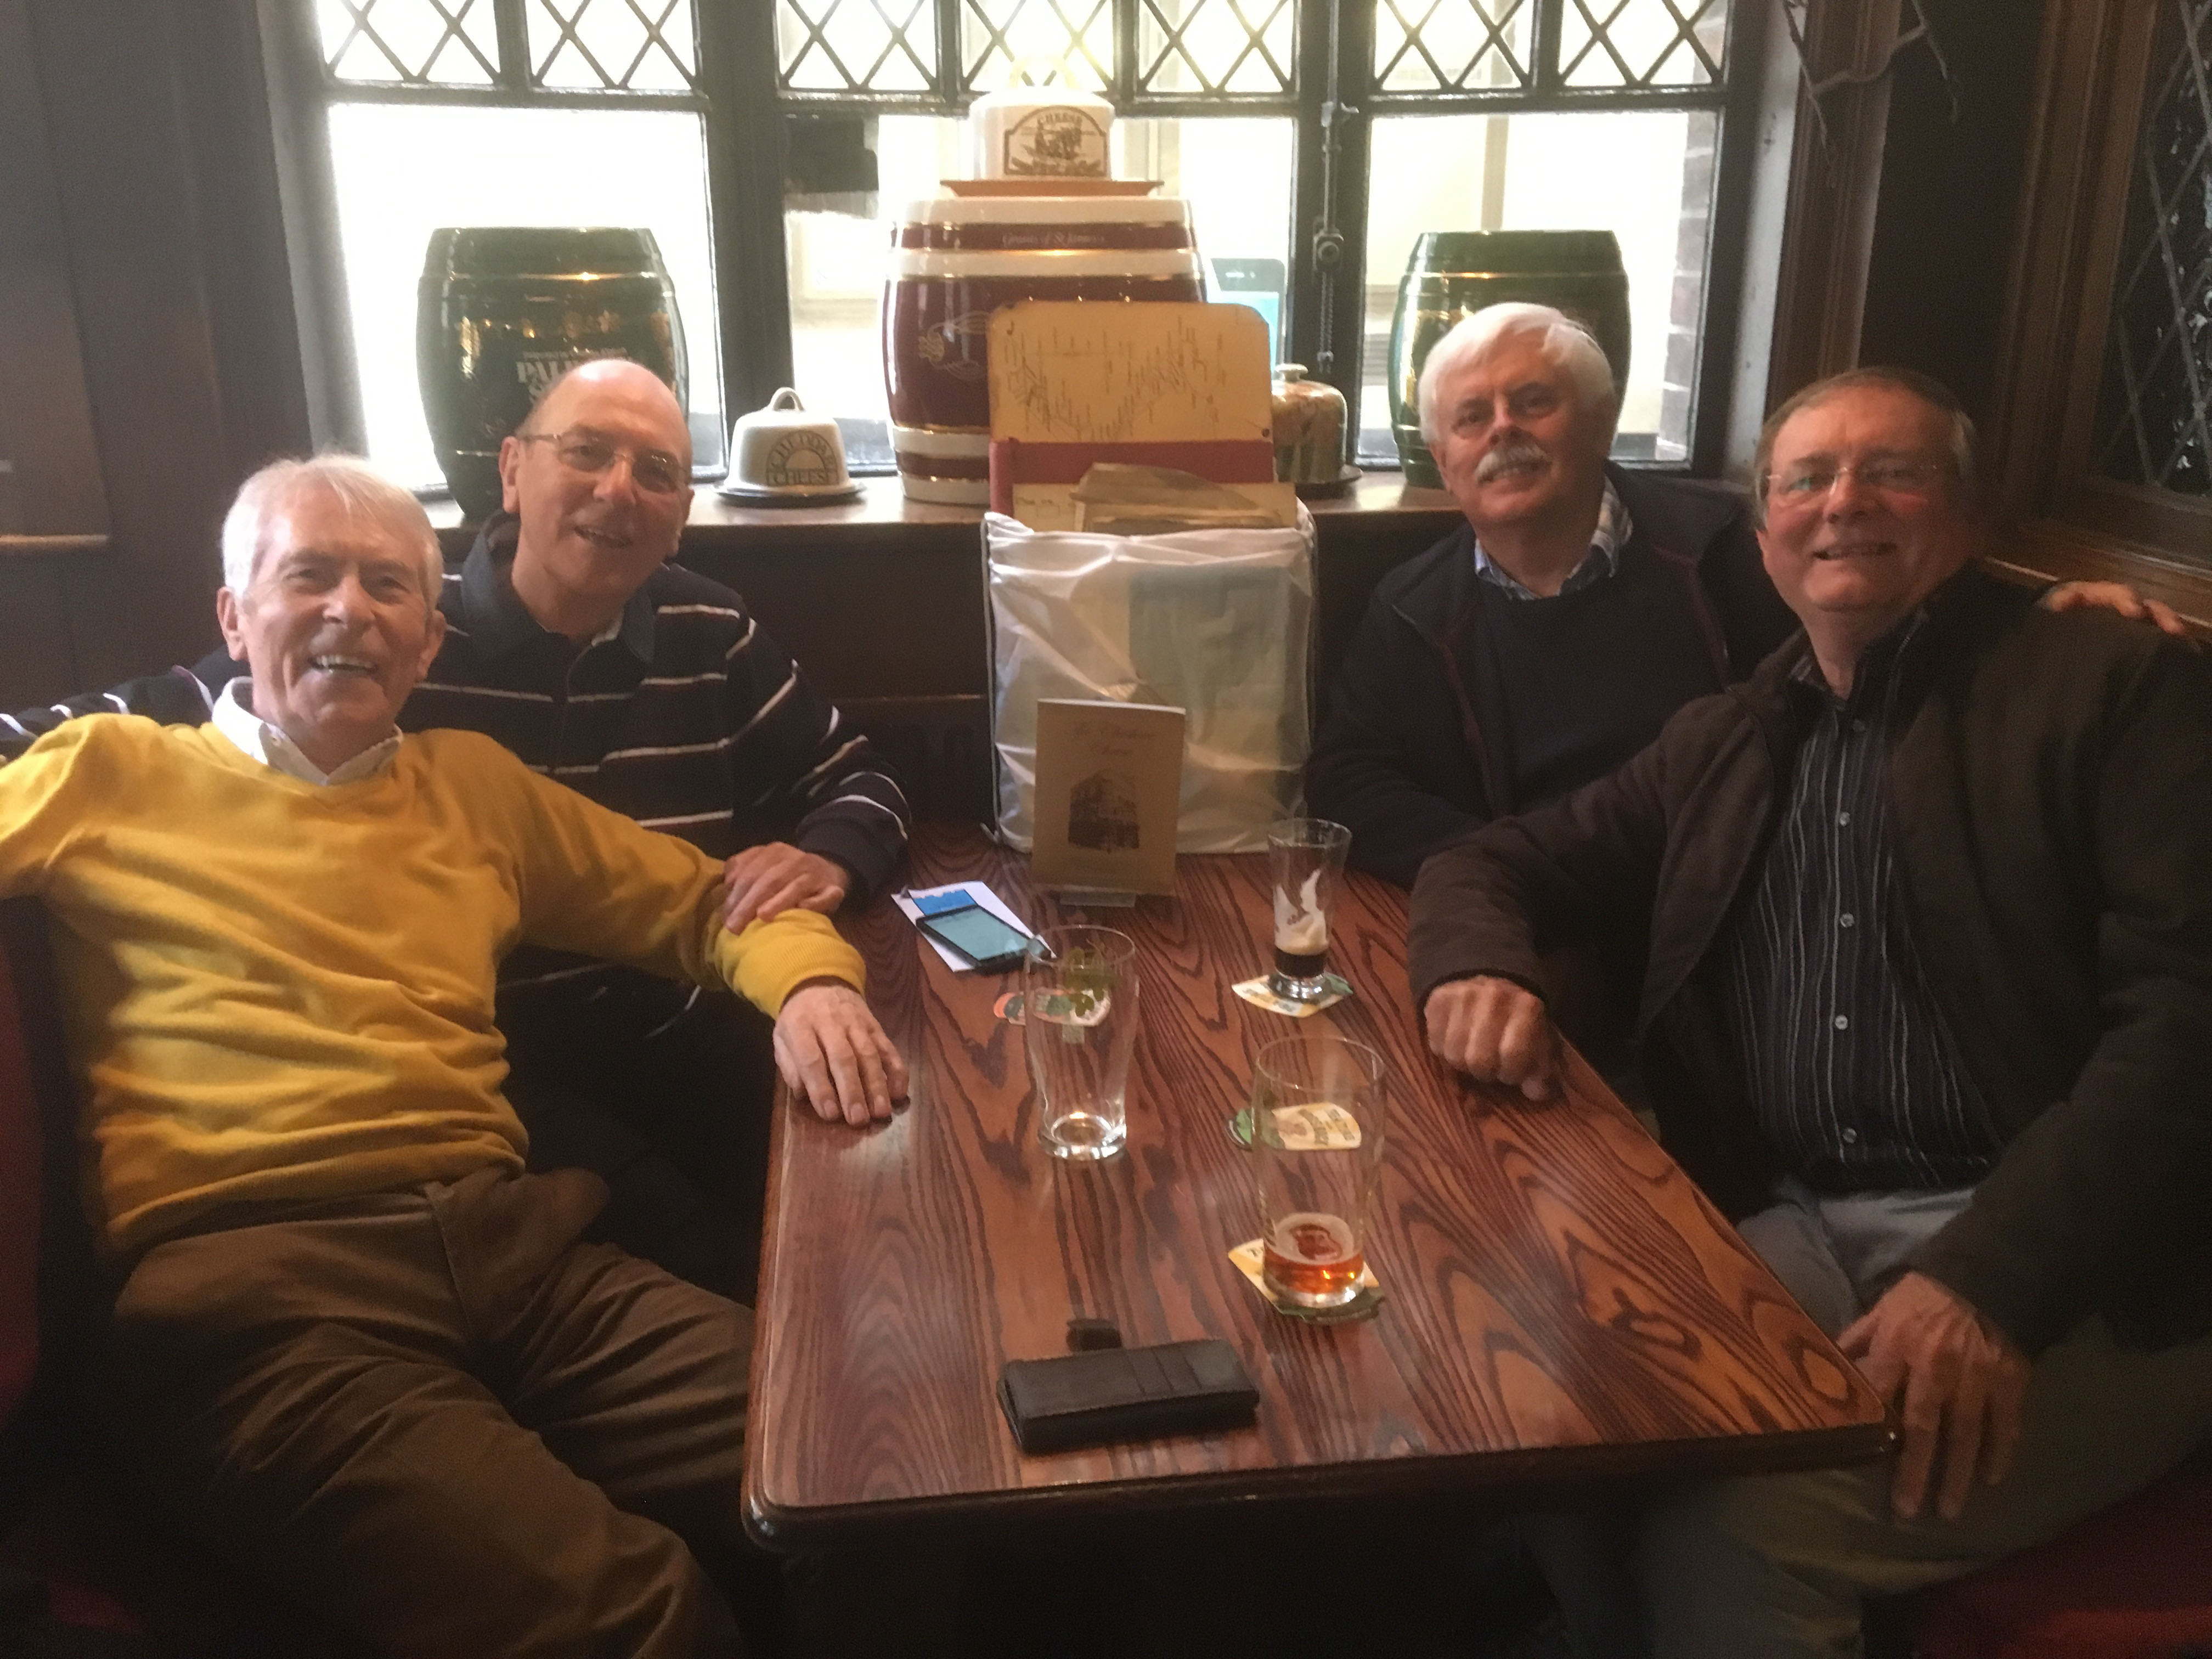 In the Cheshire Cheese. L to R, Jim Malone, Ron Shepherd, Geoff Boudreau & Jim Grant